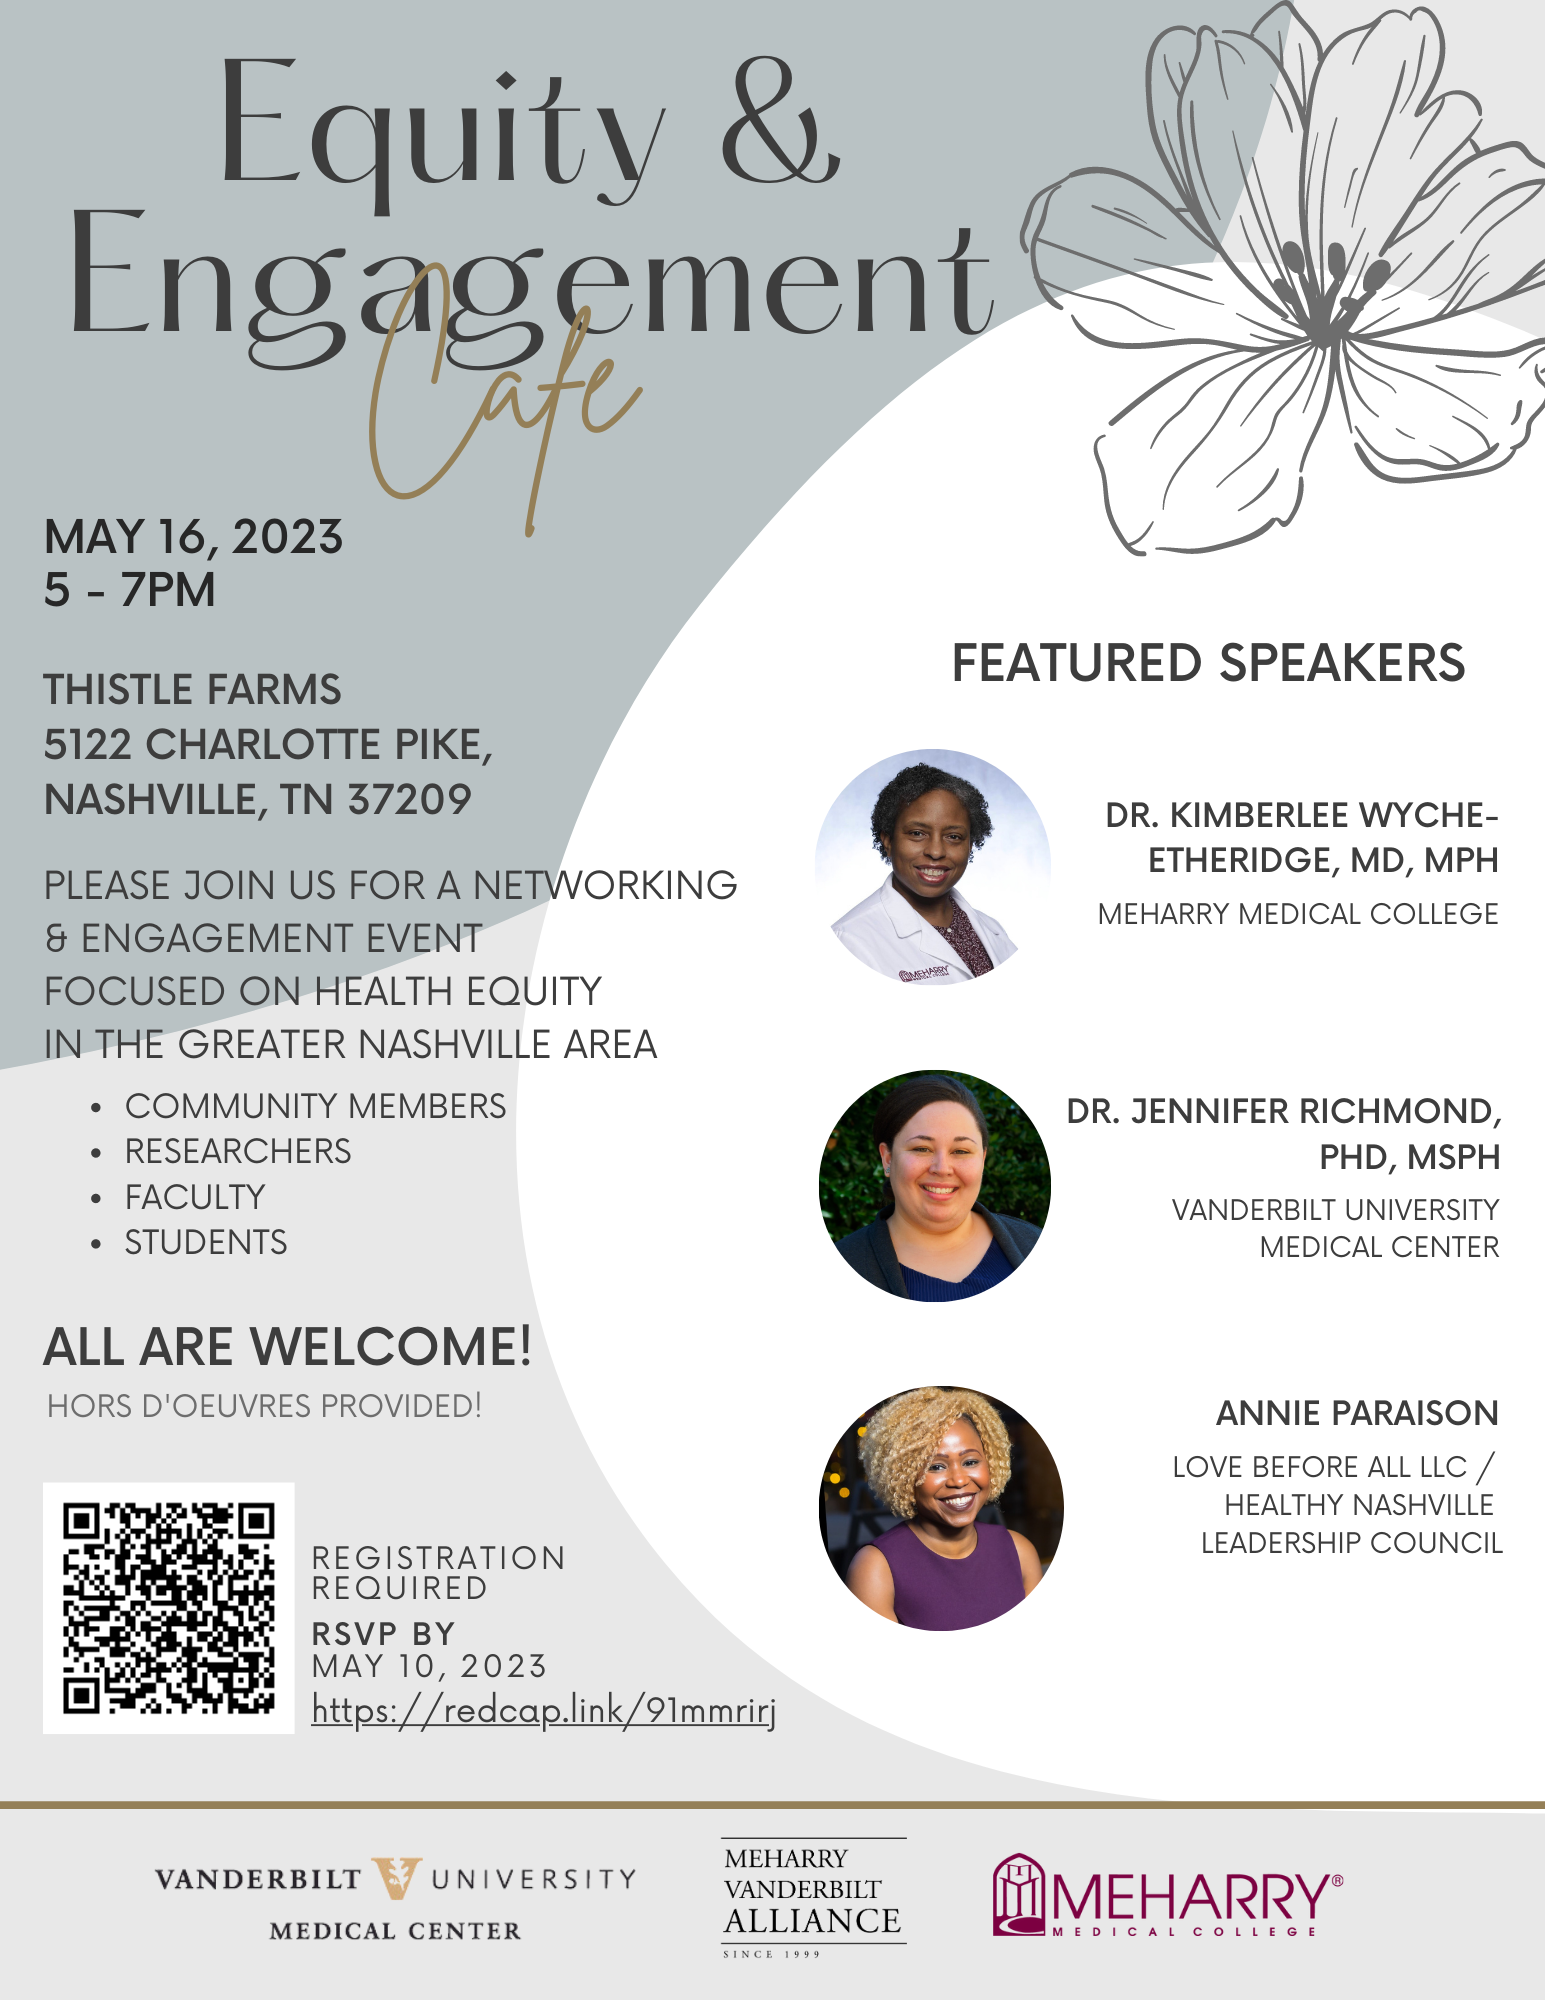 Equity & Engagement May 16, 2023